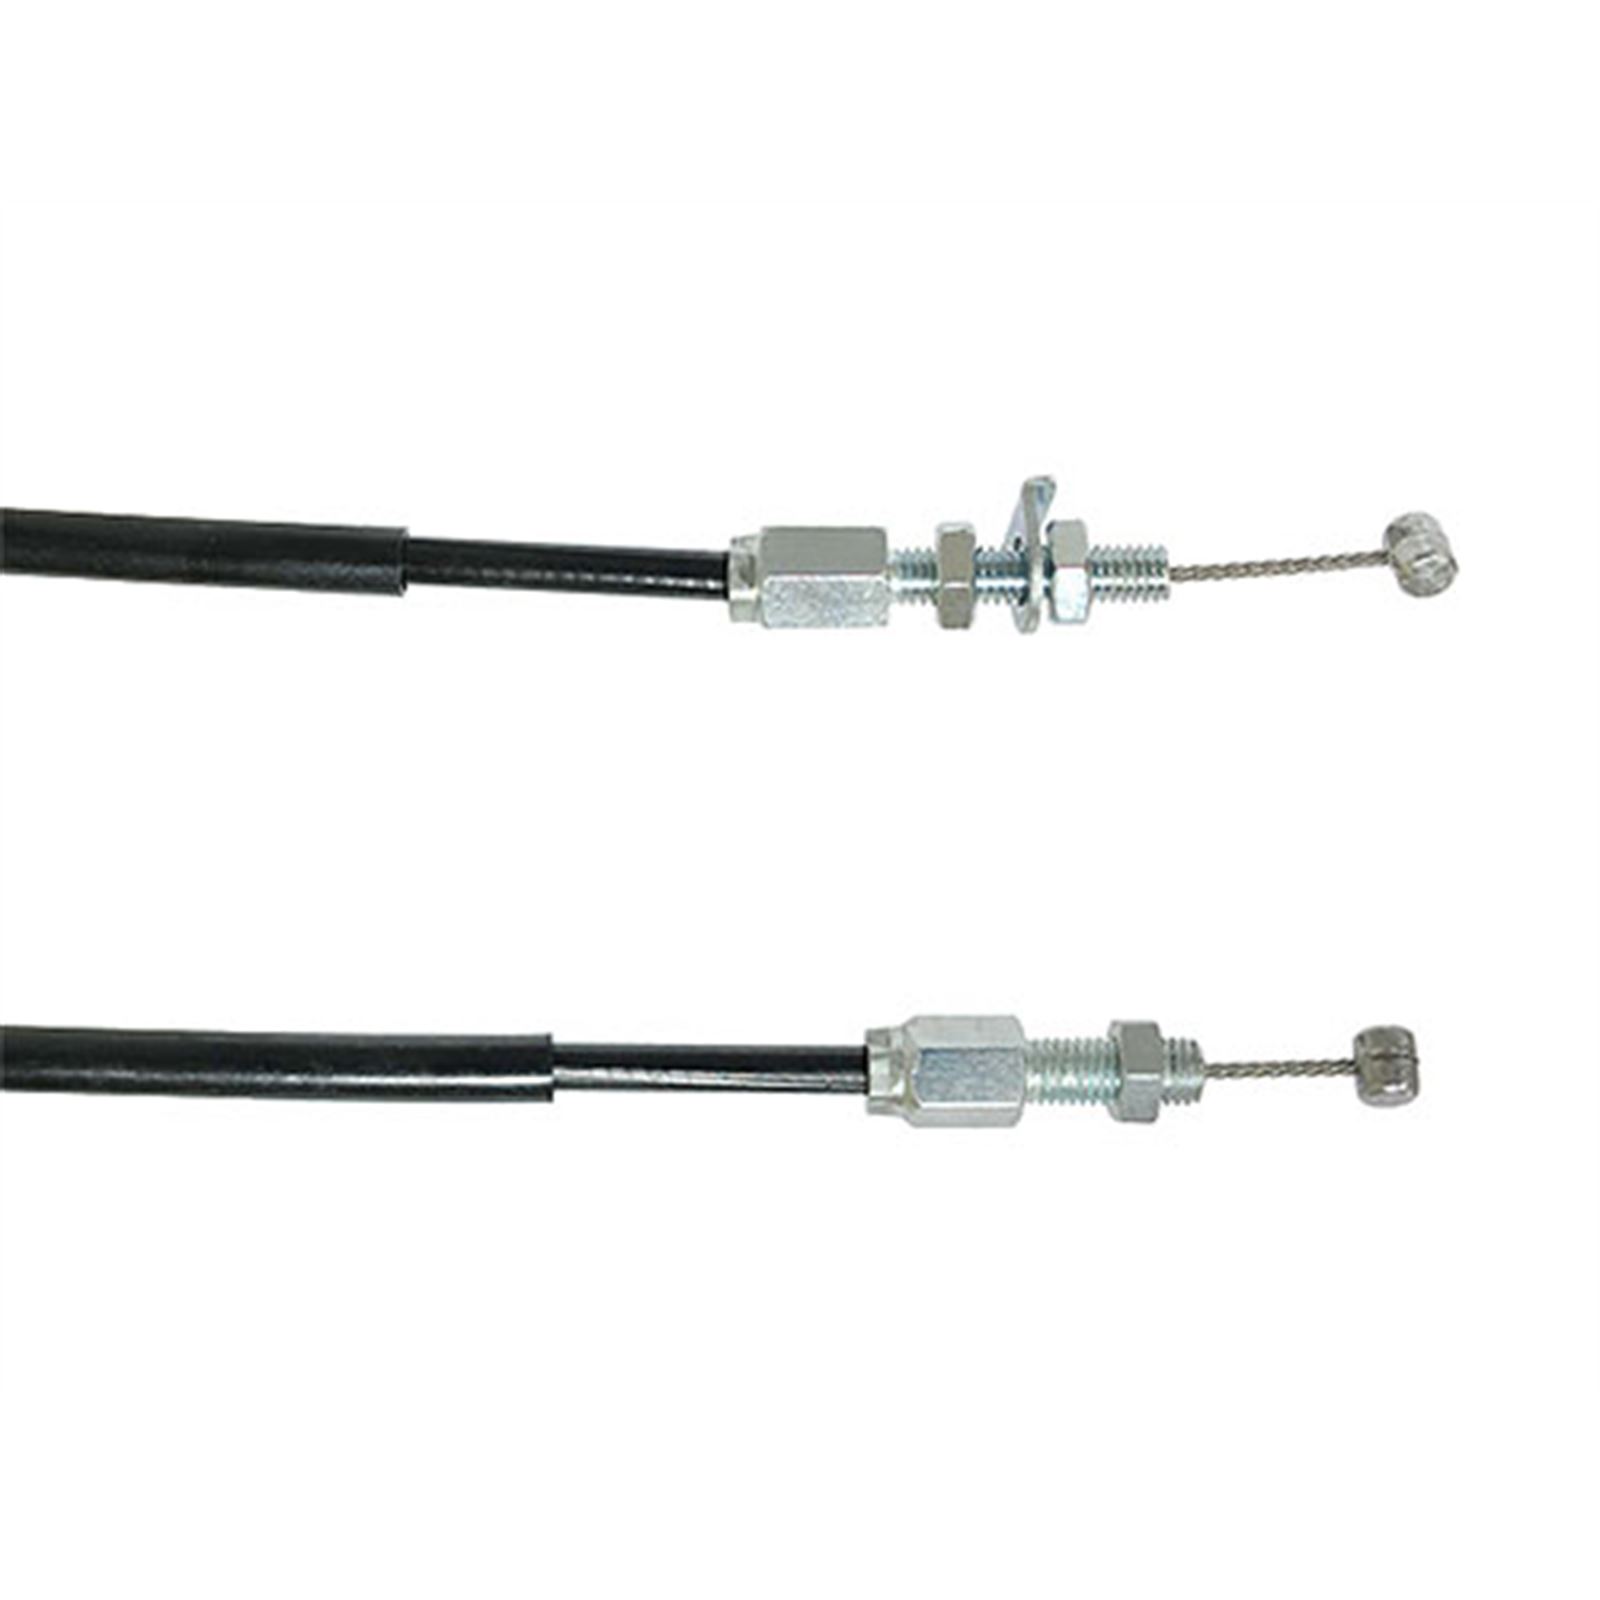 Psychic MX Components Throttle Cable for Honda - Pull